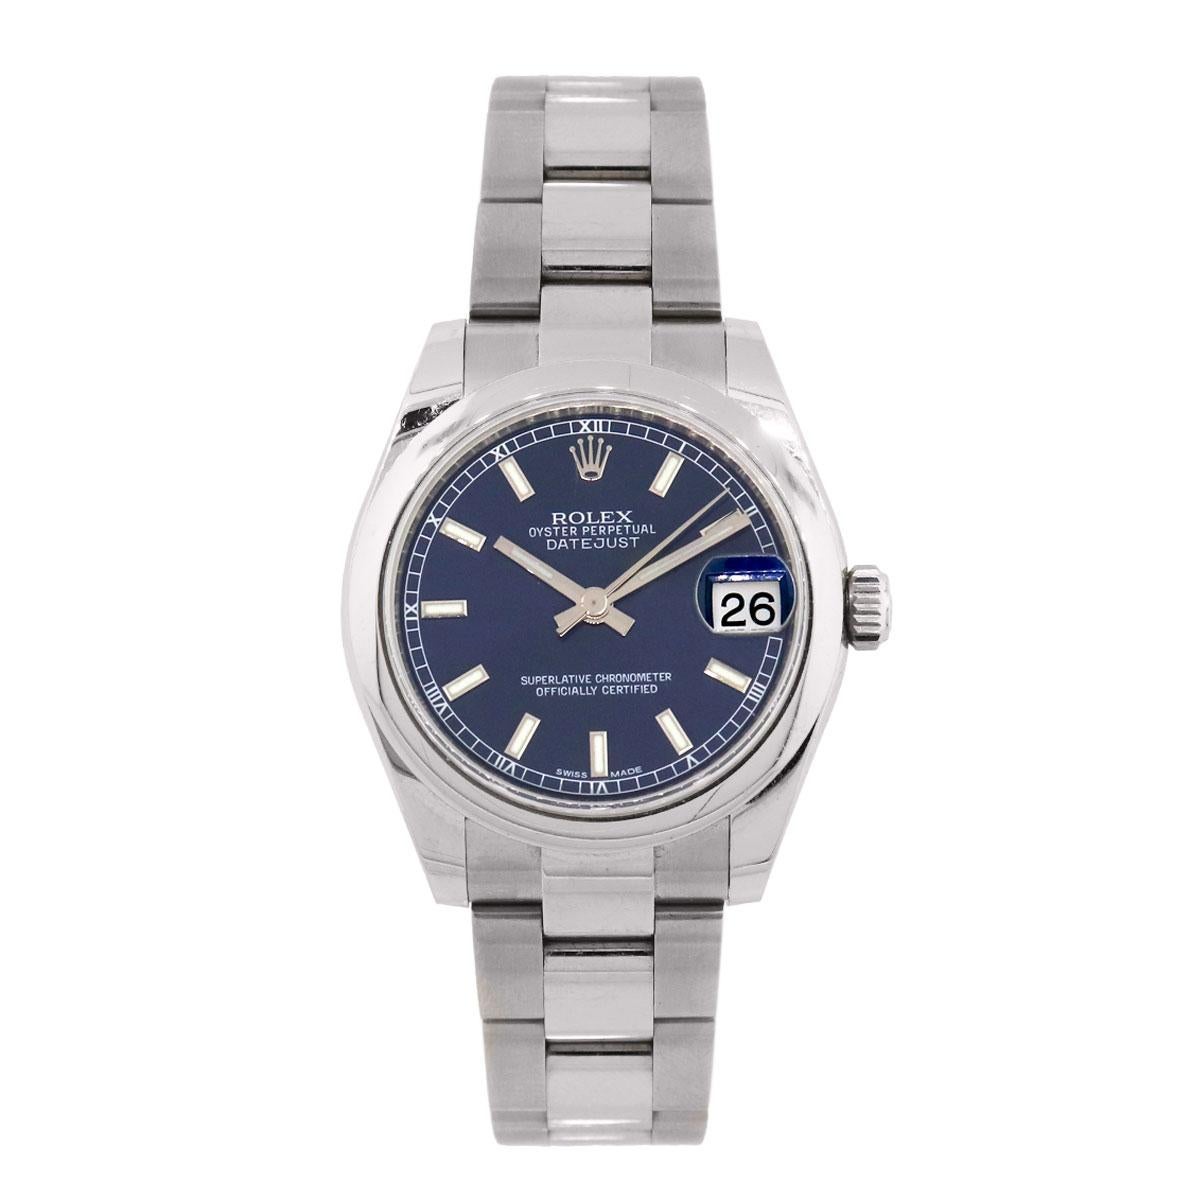 Brand: Rolex
MPN: 178240
Model: Datejust
Case Material: Stainless Steel
Case Diameter: 31mm
Crystal: Sapphire crystal
Bezel: Stainless steel smooth bezel
Dial: Blue stick dial
Bracelet: Stainless steel oyster band
Size: Will fit a 6.50″